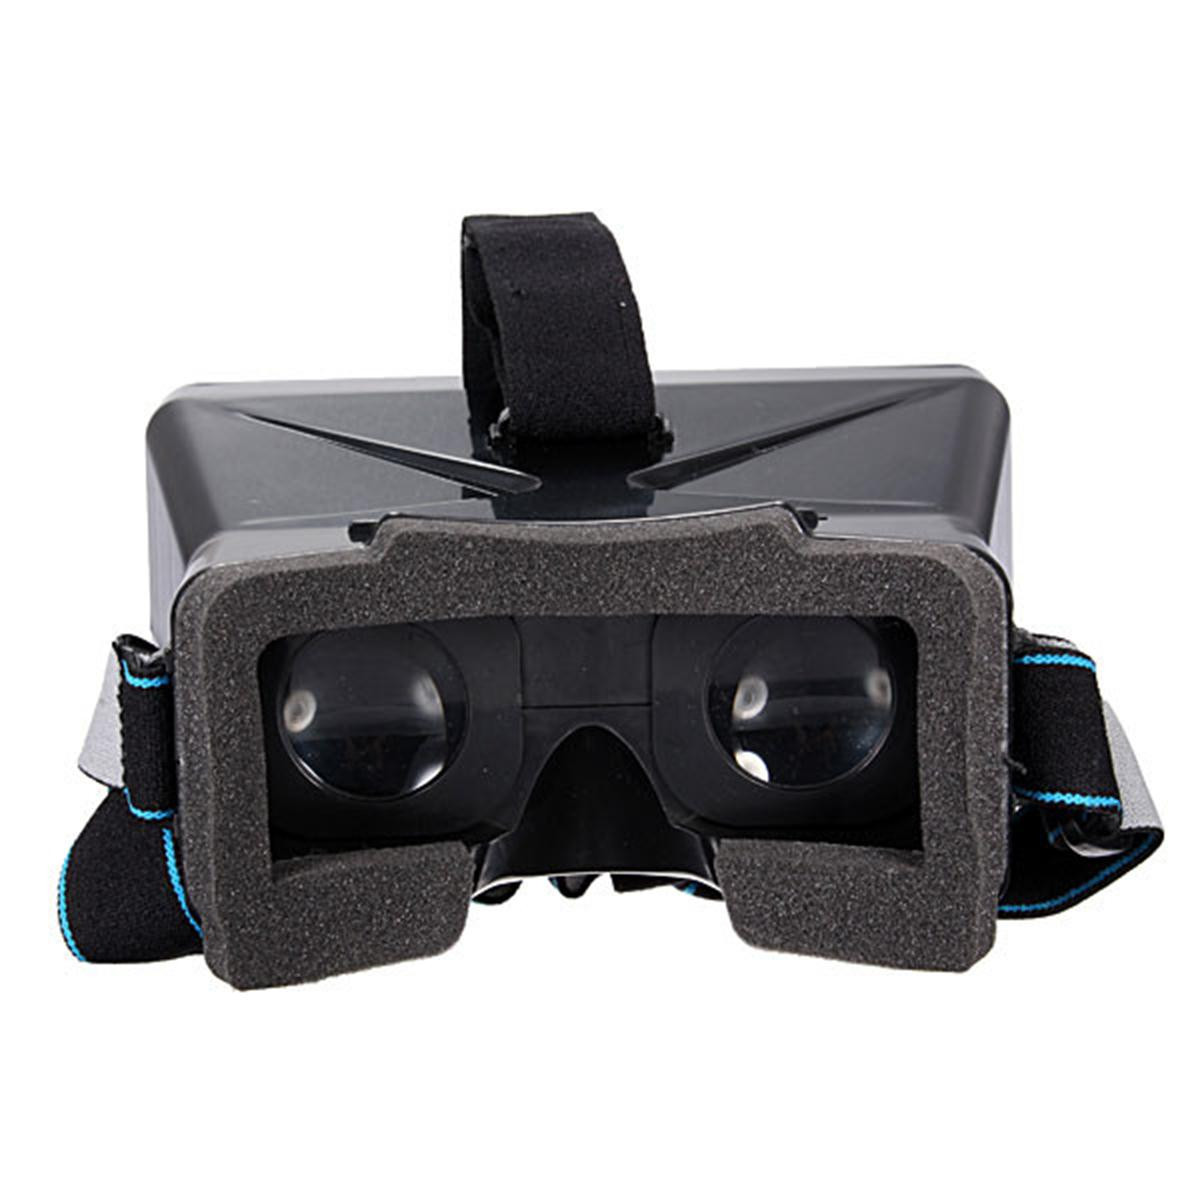 Find ELEGIANT Virtual Reality VR Glasses for Mobile Phone 3D Glass Wearing Stereoscopic Head Wear 3D Glasses for Sale on Gipsybee.com with cryptocurrencies